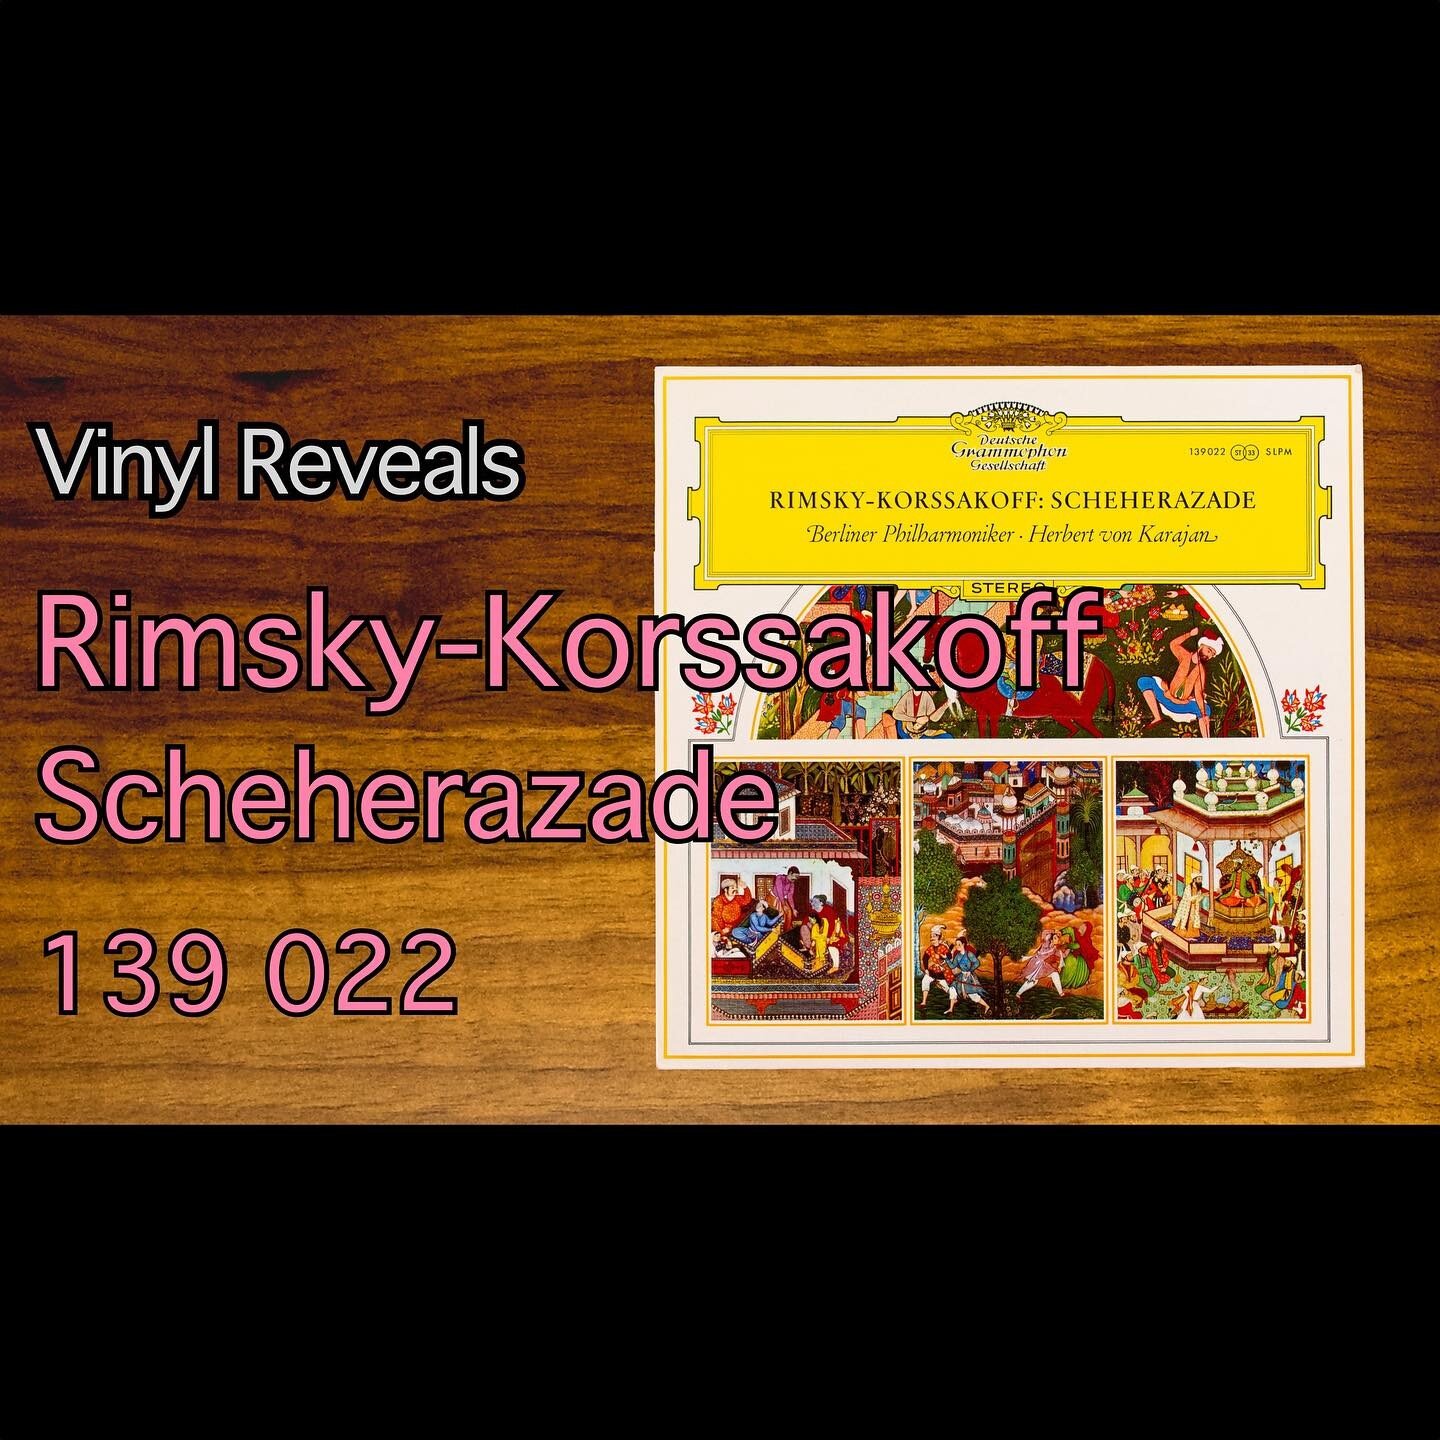 Today we are looking at Scheherazade by Rimsky-Korssakoff. Video is now live on the Vinyl Reveals YouTube channel. Link in profile.

#vinylReveal #vinyl #vinylcollection #vinylrecords #records #vinylReveals #vinylcommunity